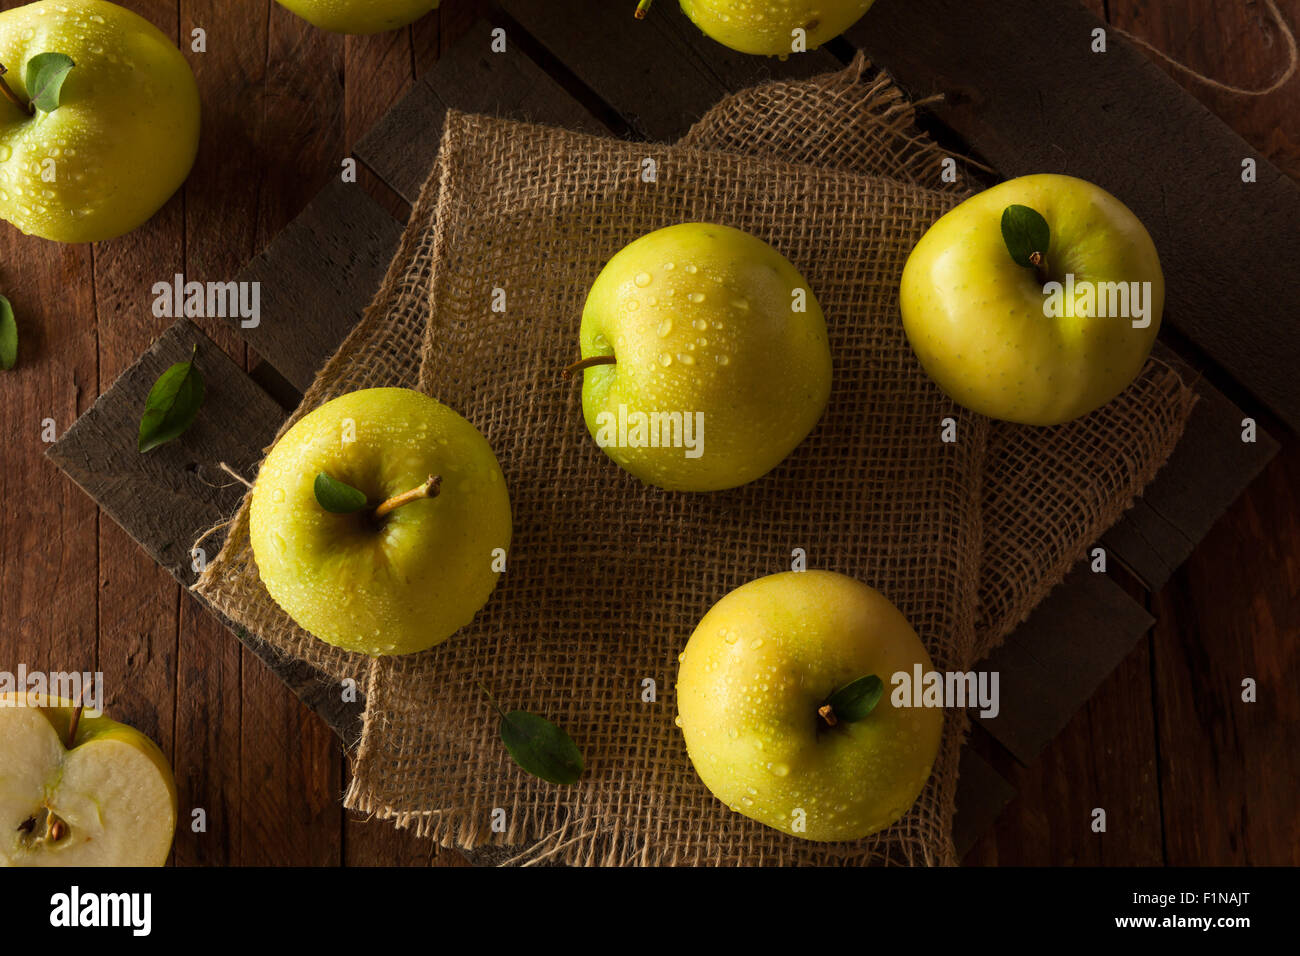 Raw Organic Golden Delicious Apples Ready to Eat Stock Photo